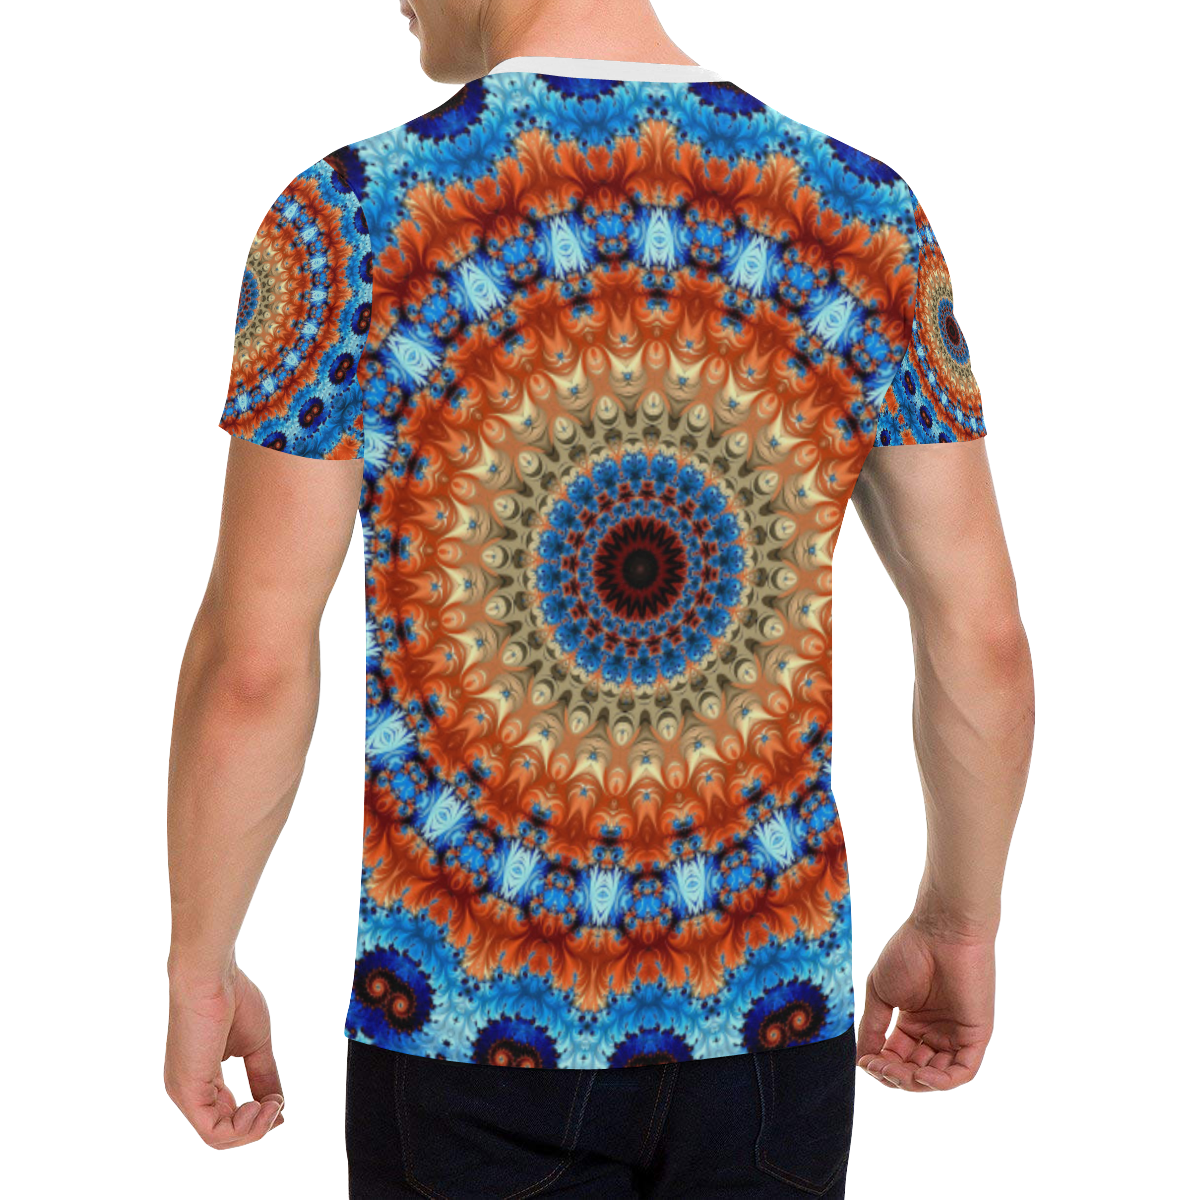 Kaleidoscope Men's All Over Print T-Shirt with Chest Pocket (Model T56)